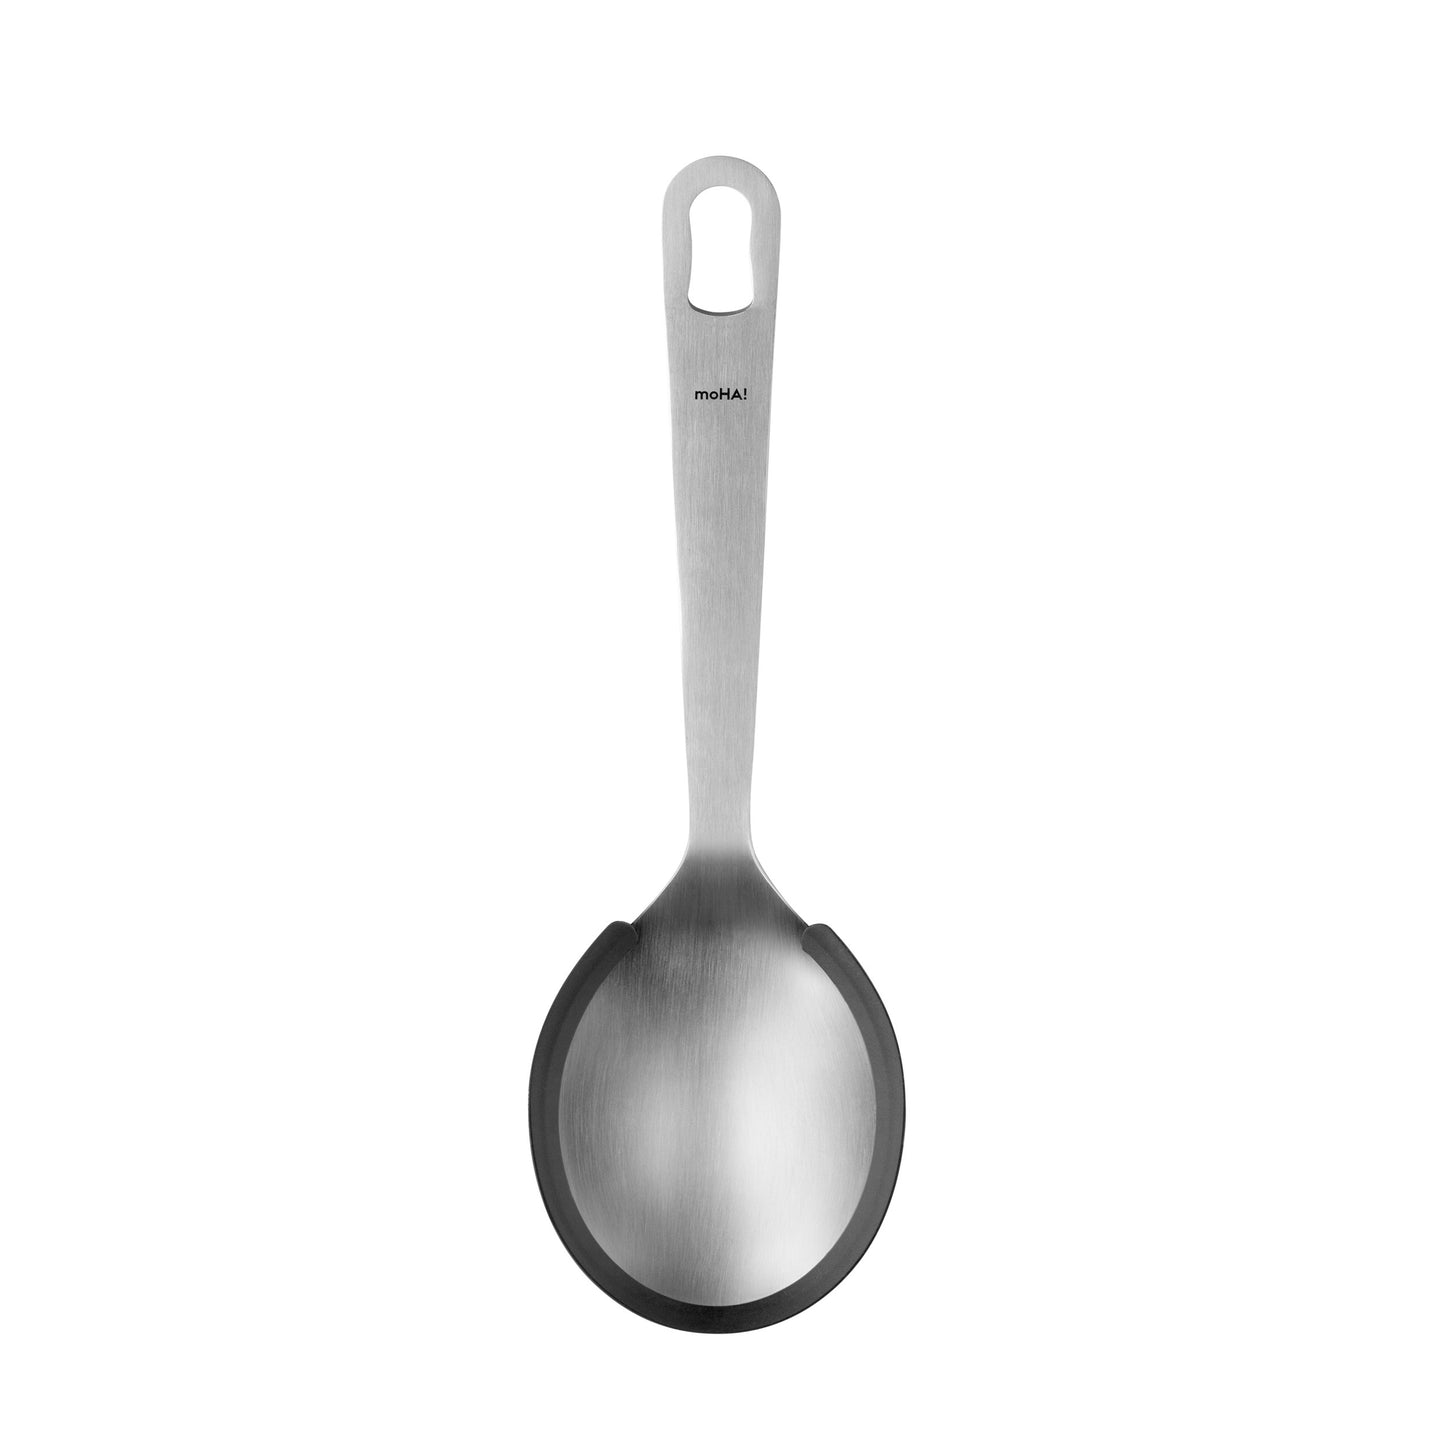 MoHA! by Widgeteer Riso Rice Spoon, Stainless Steel/Silicone